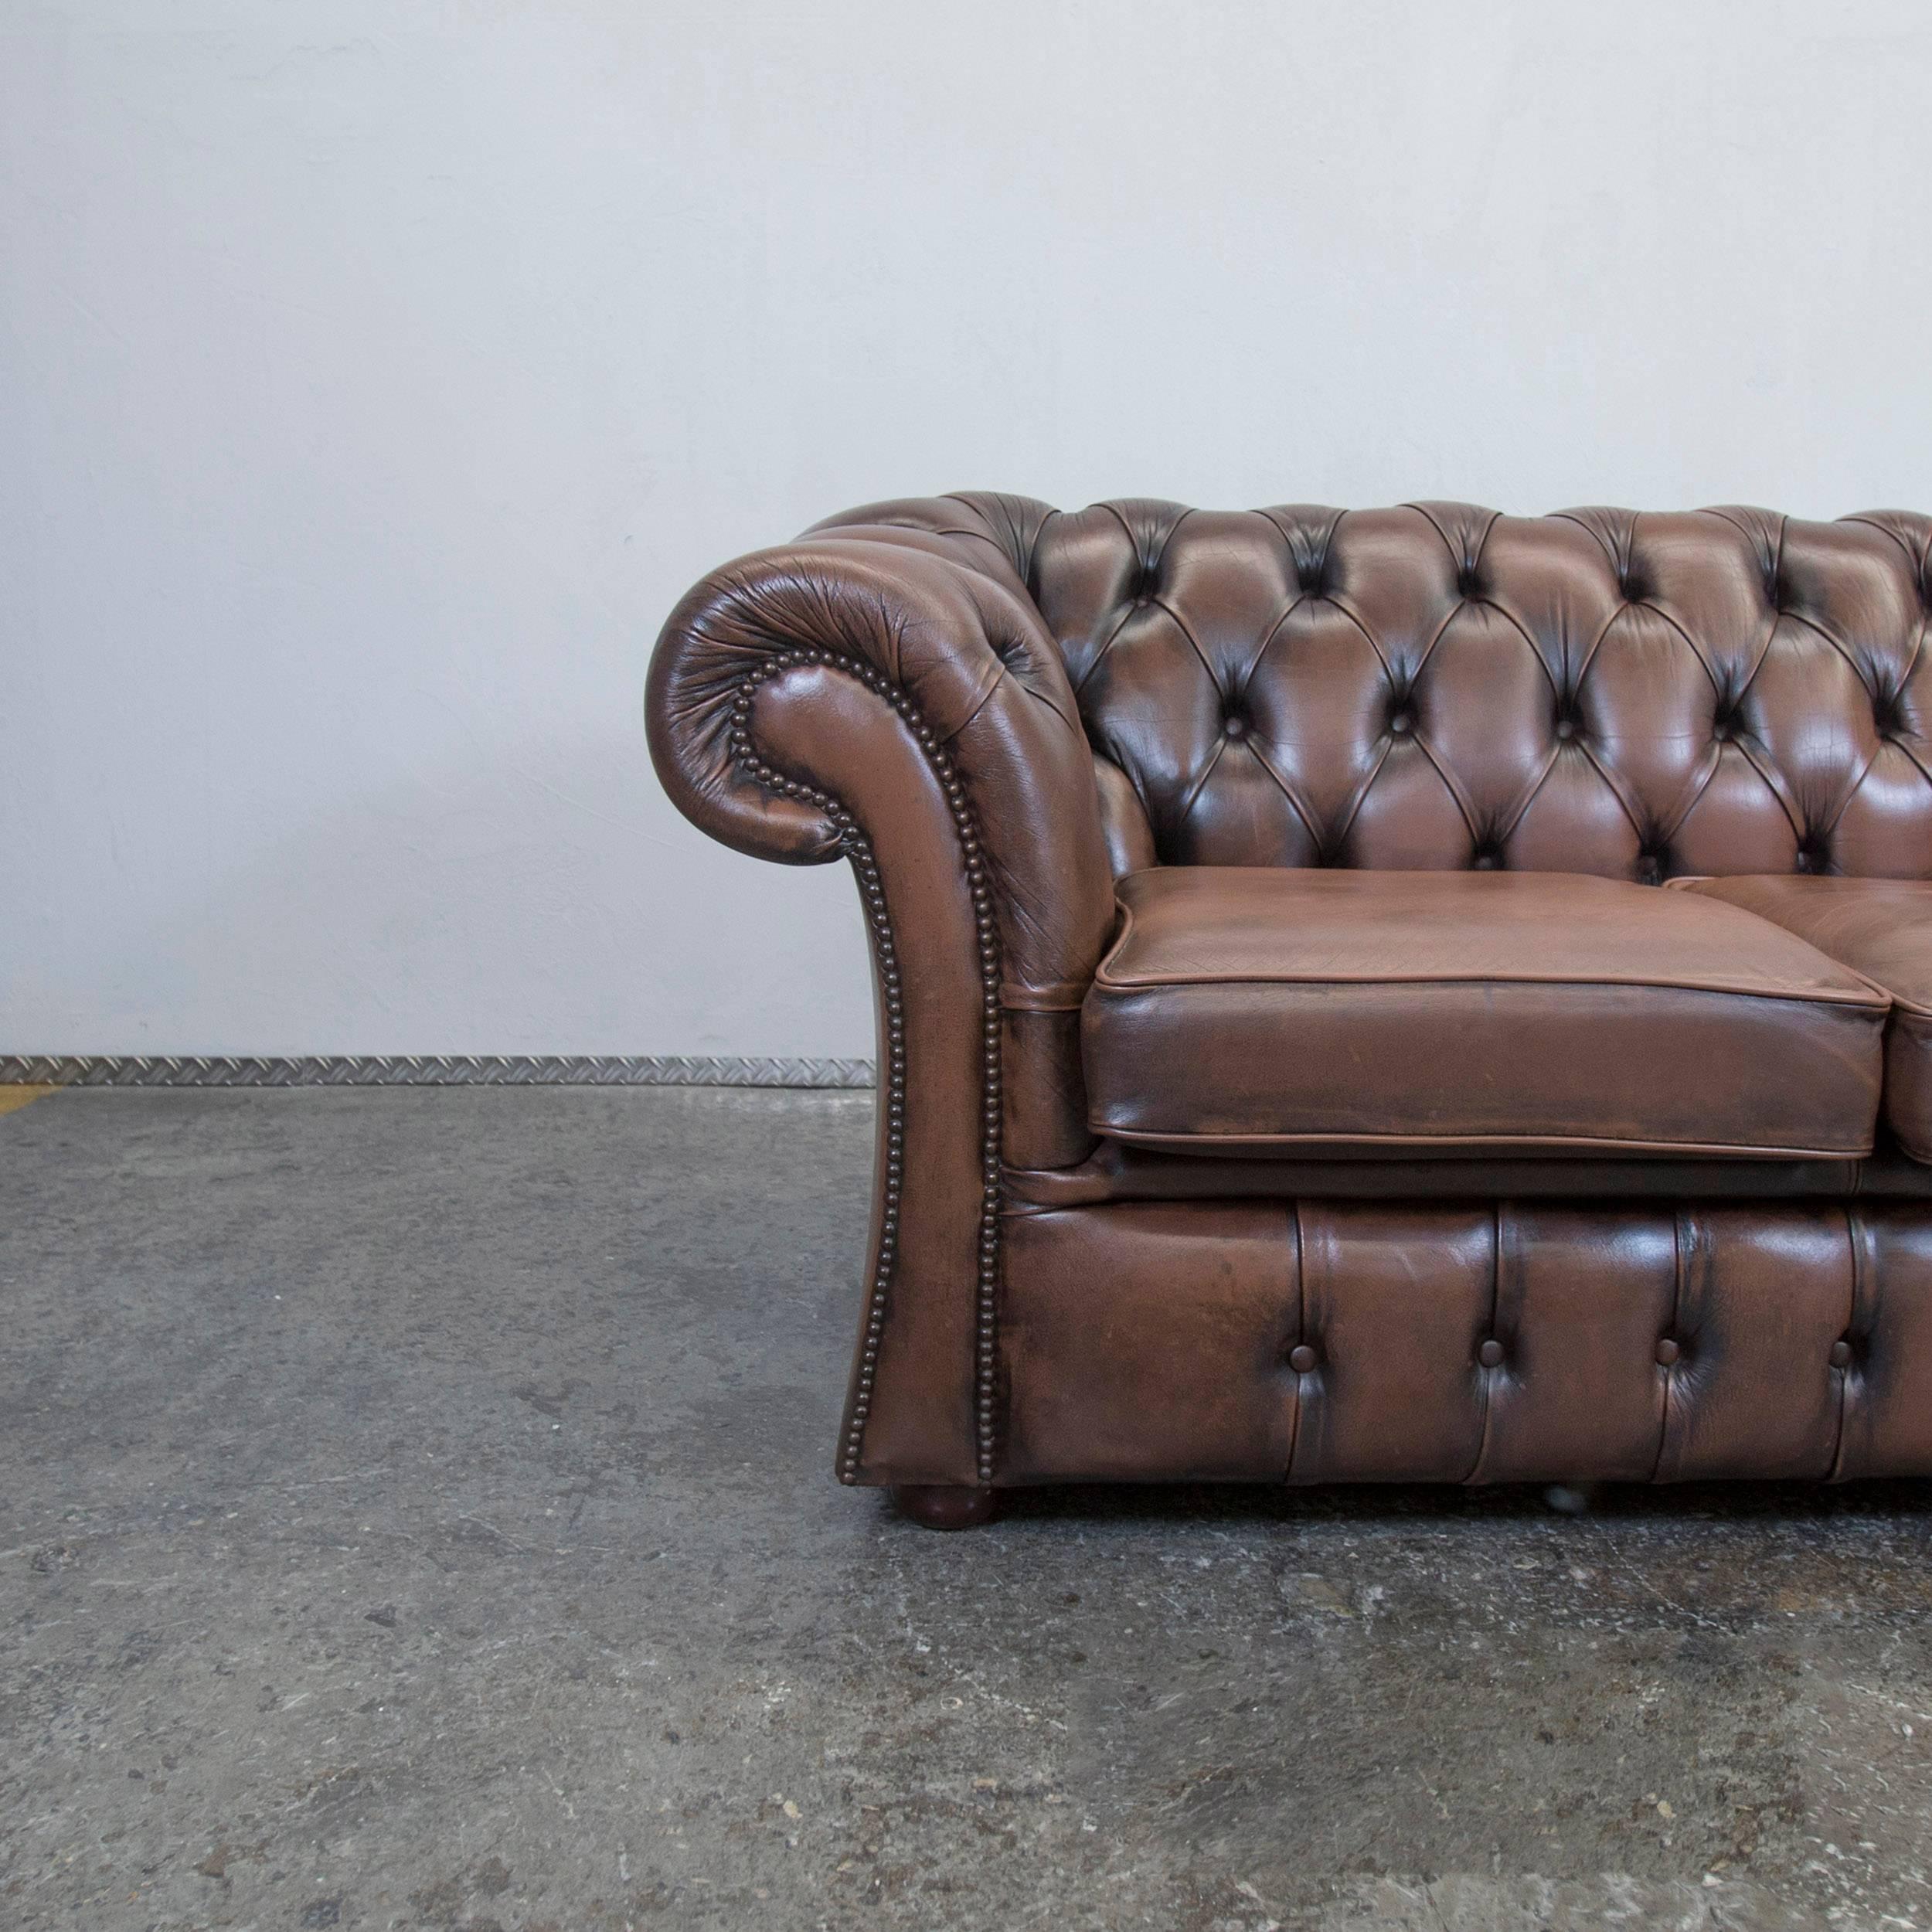 Brown colored original Chesterfield leather sofa in a vintage design, made for pure comfort and elegance.